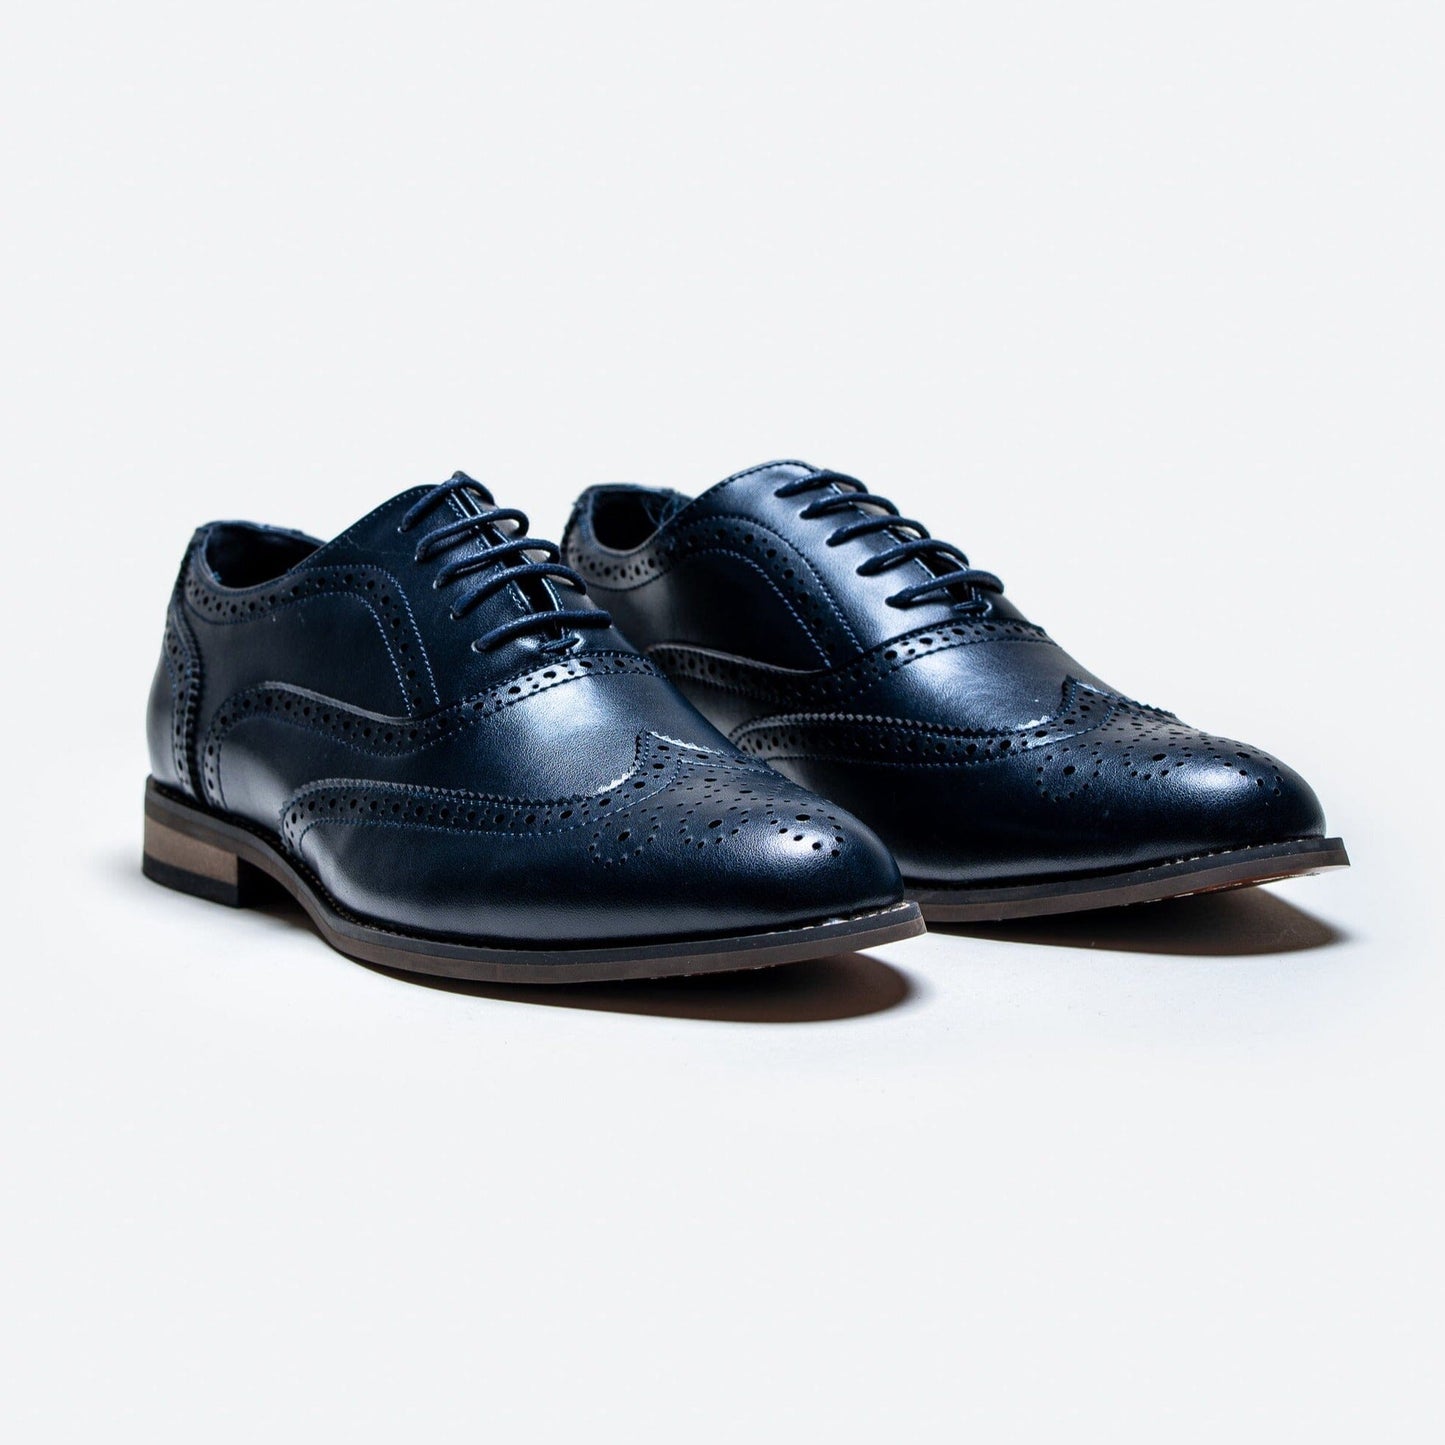 Clark Navy Brogue Shoes - OOS - 2/8/23 - Shoes - - THREADPEPPER